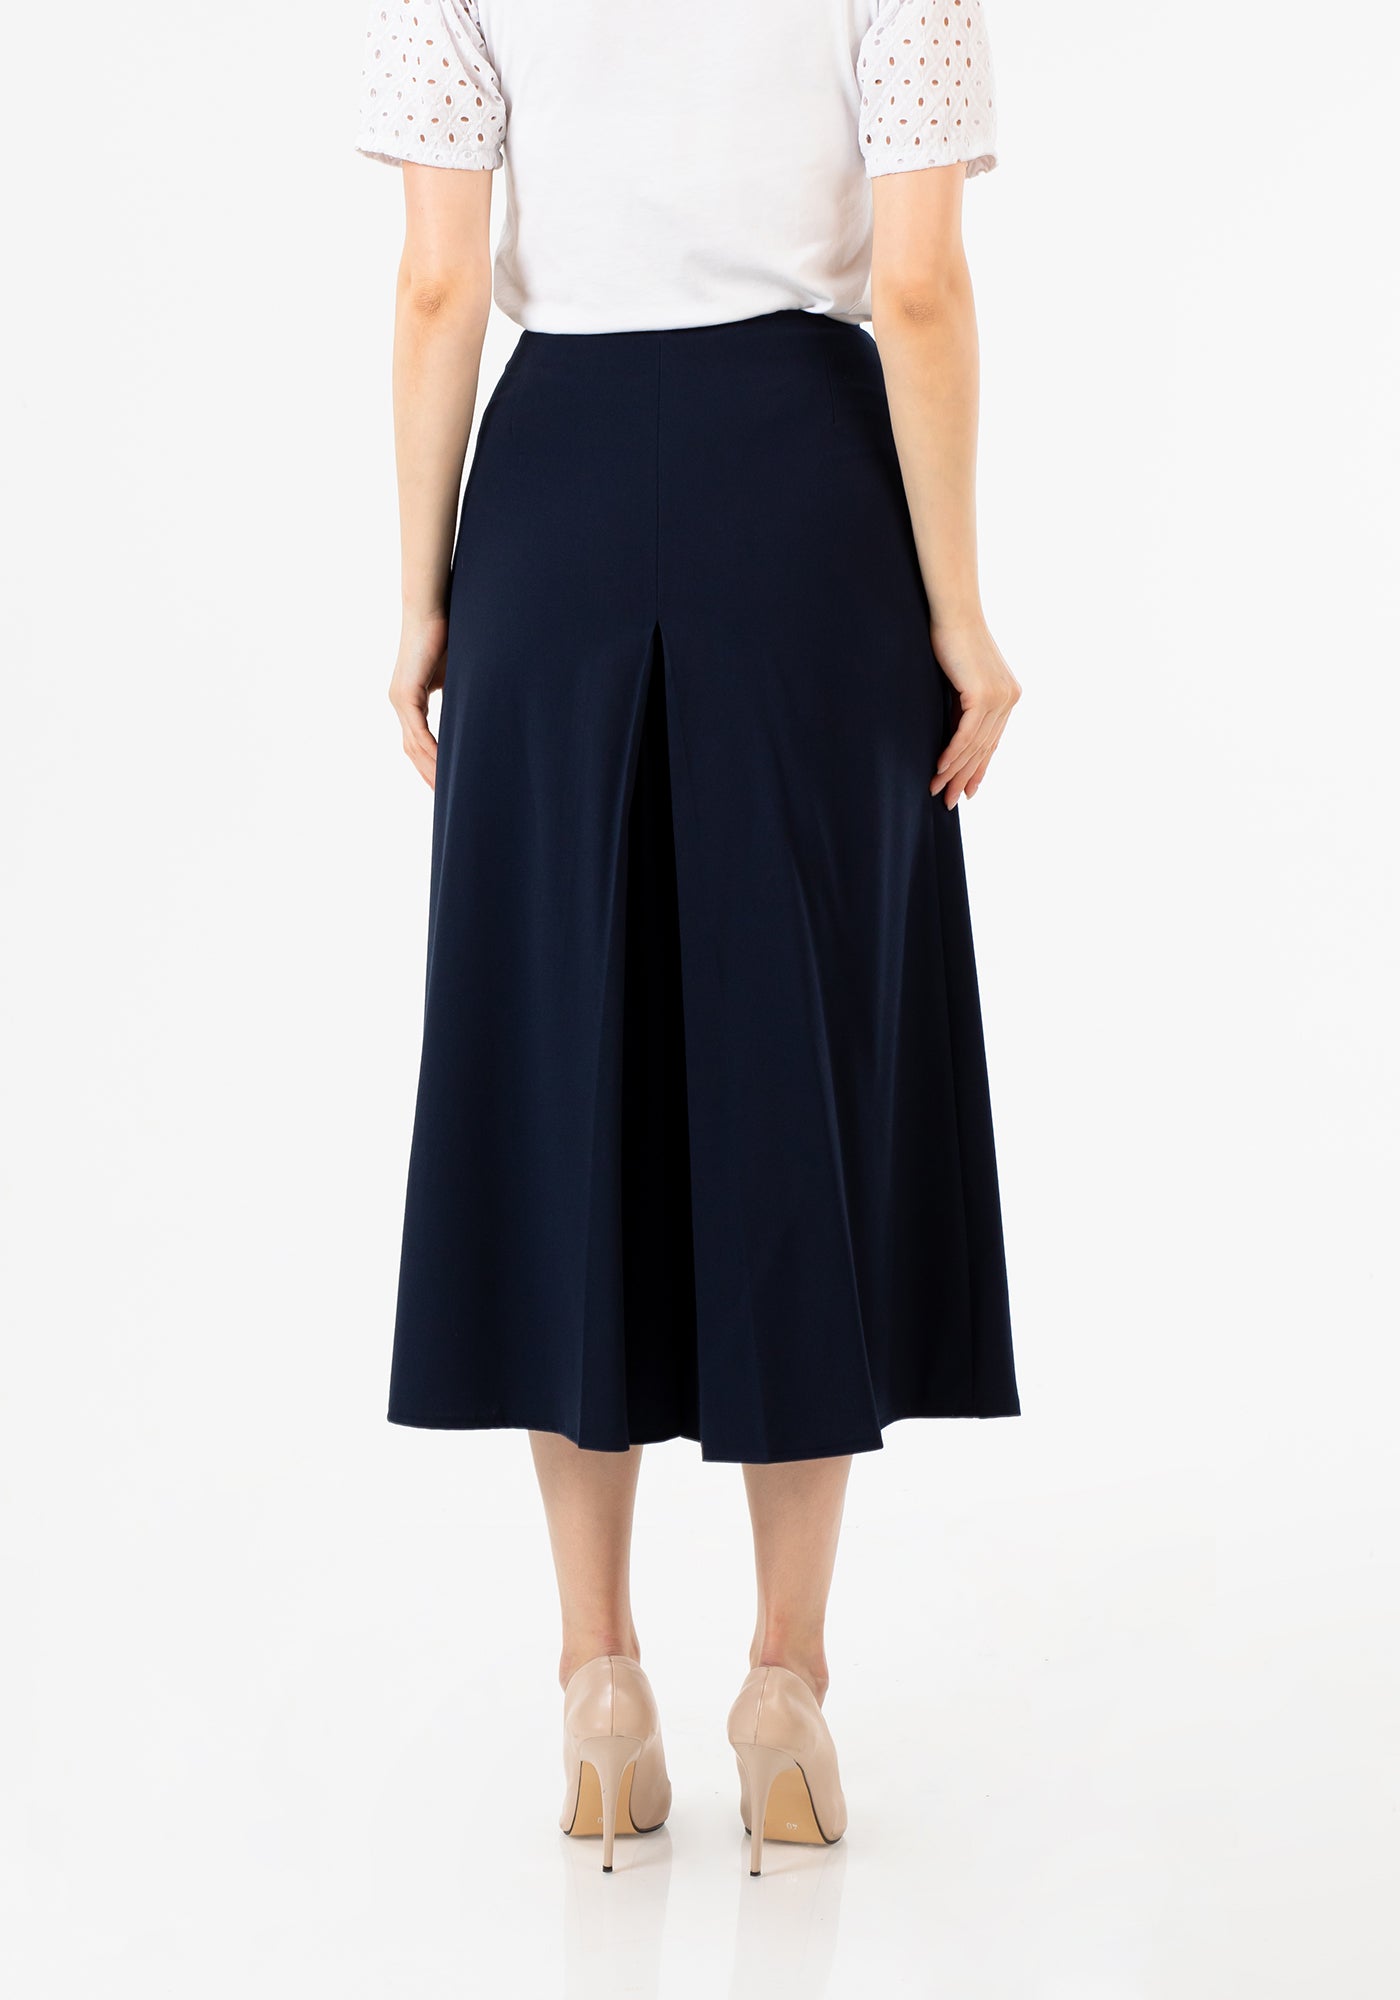 Navy Blue High Waist Cropped Palazzo Pants Culottes G-Line